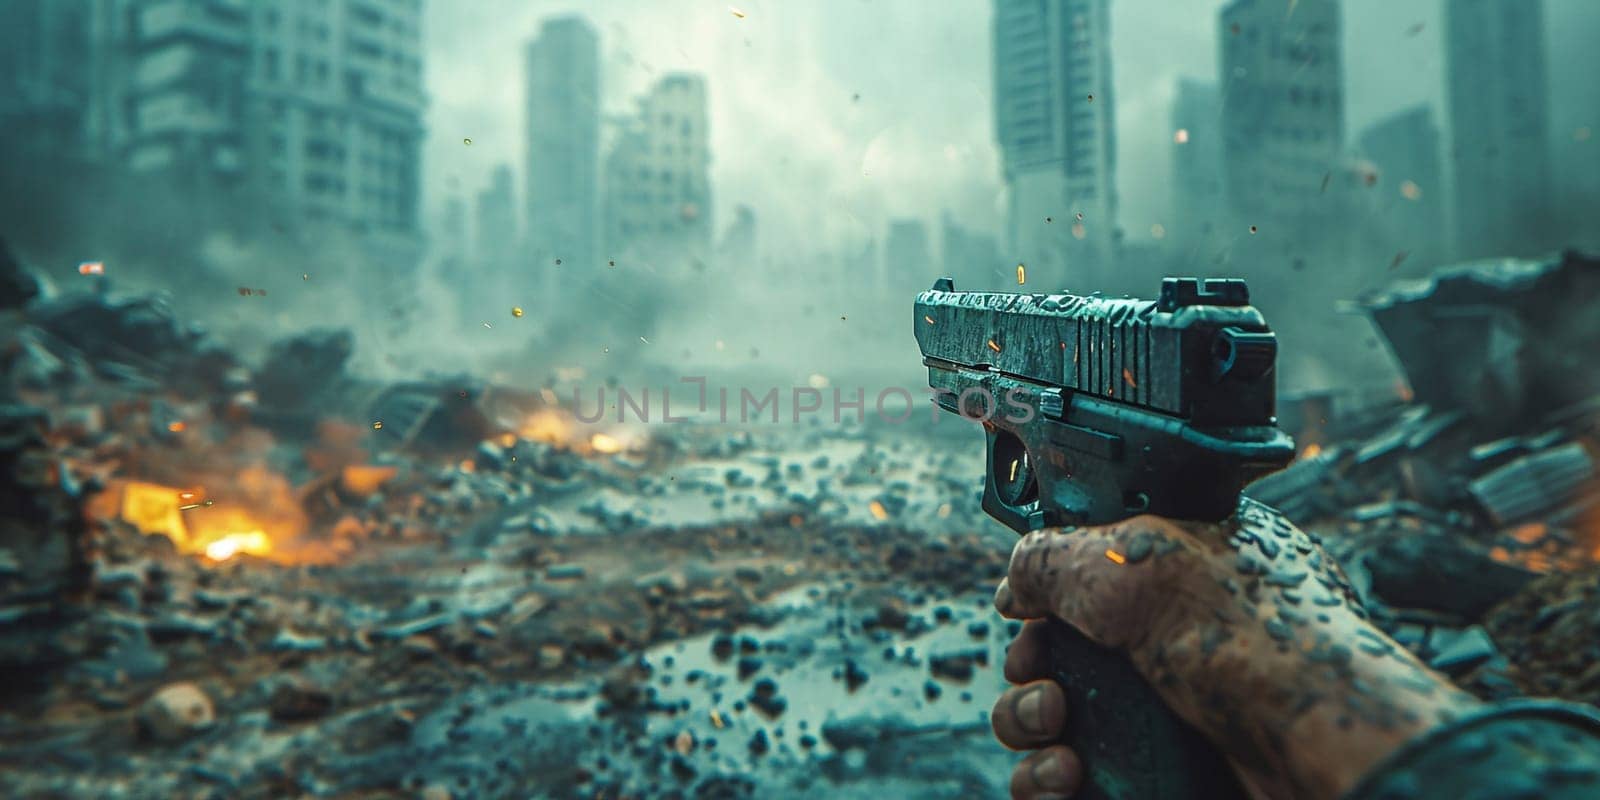 Post-apocalyptic world, a soldier wearing unique anti-nuclear armor stands with a conceptual rifle amidst the ruins of a city destroyed by nuclear war. High quality photo